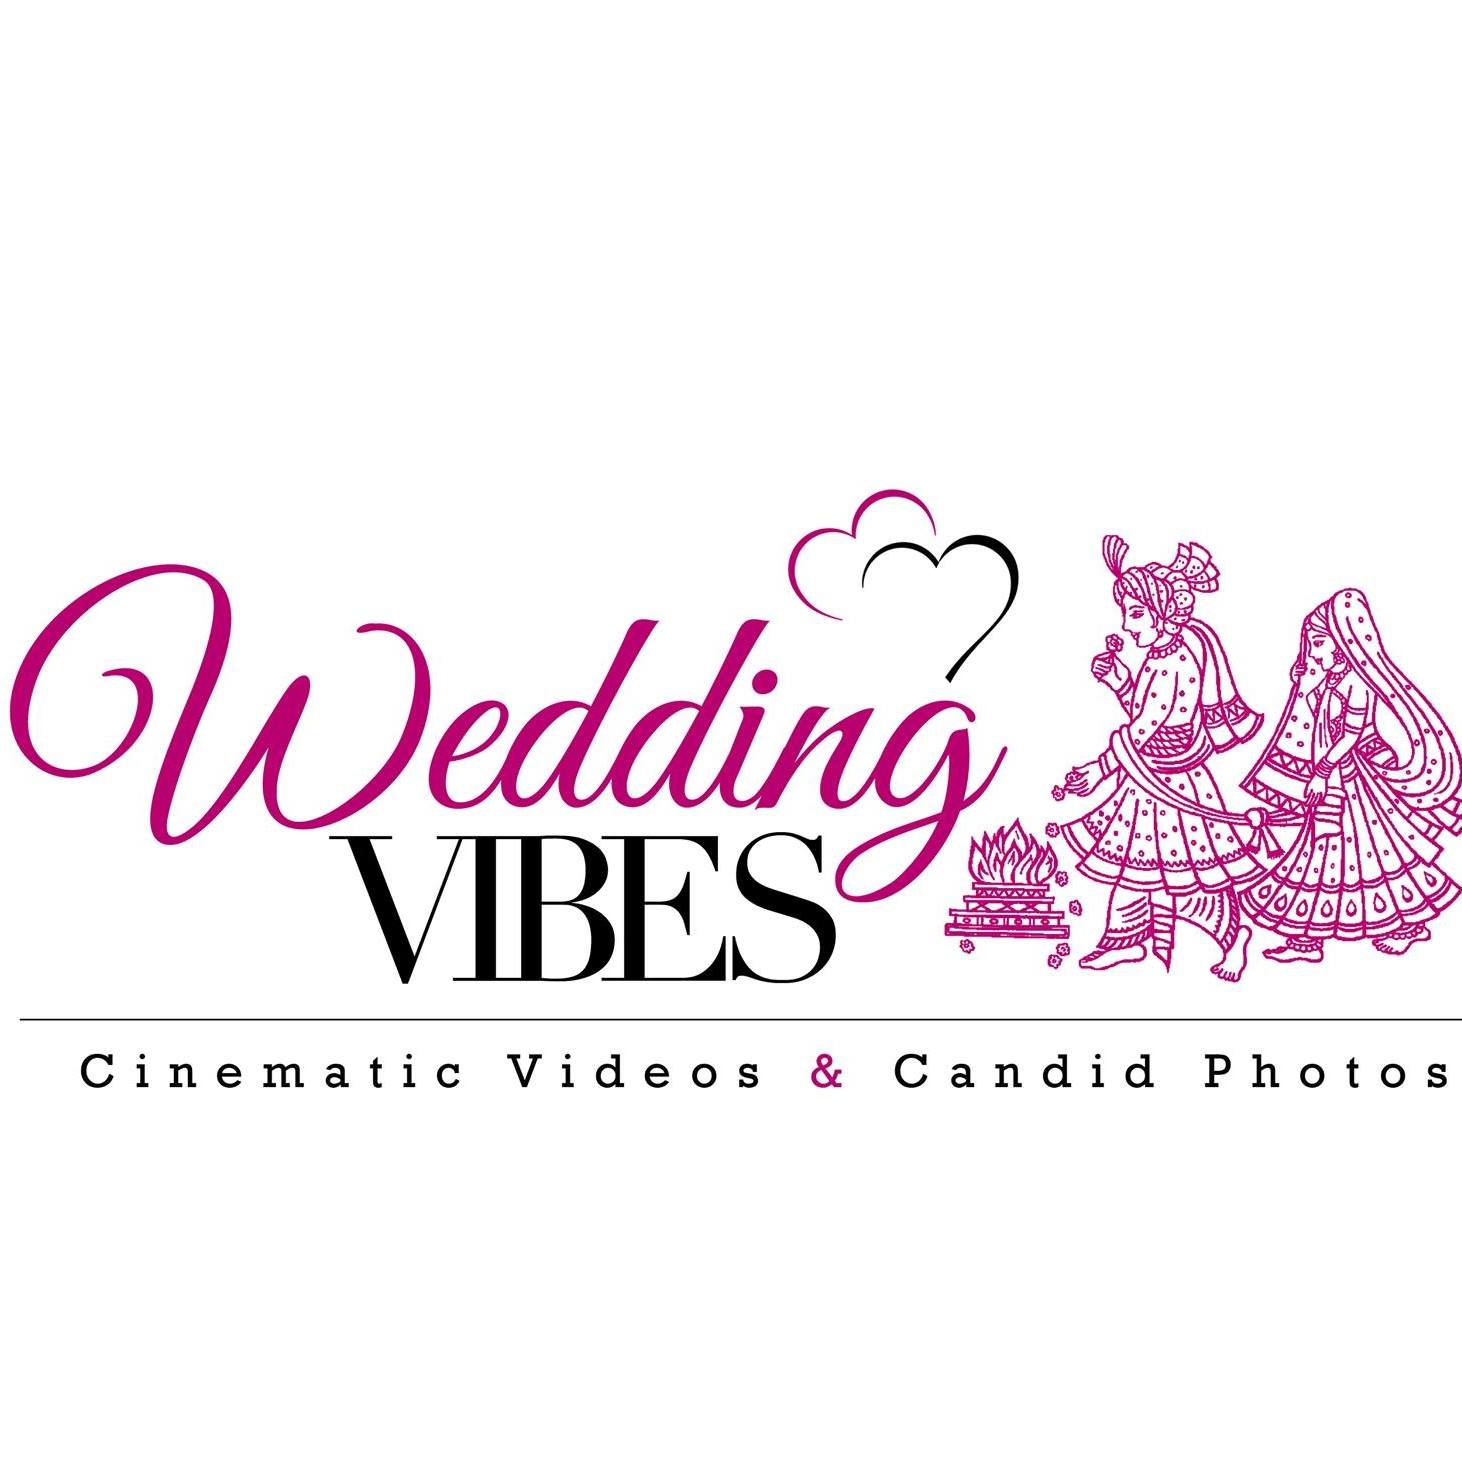 Wedding vibes|Catering Services|Event Services